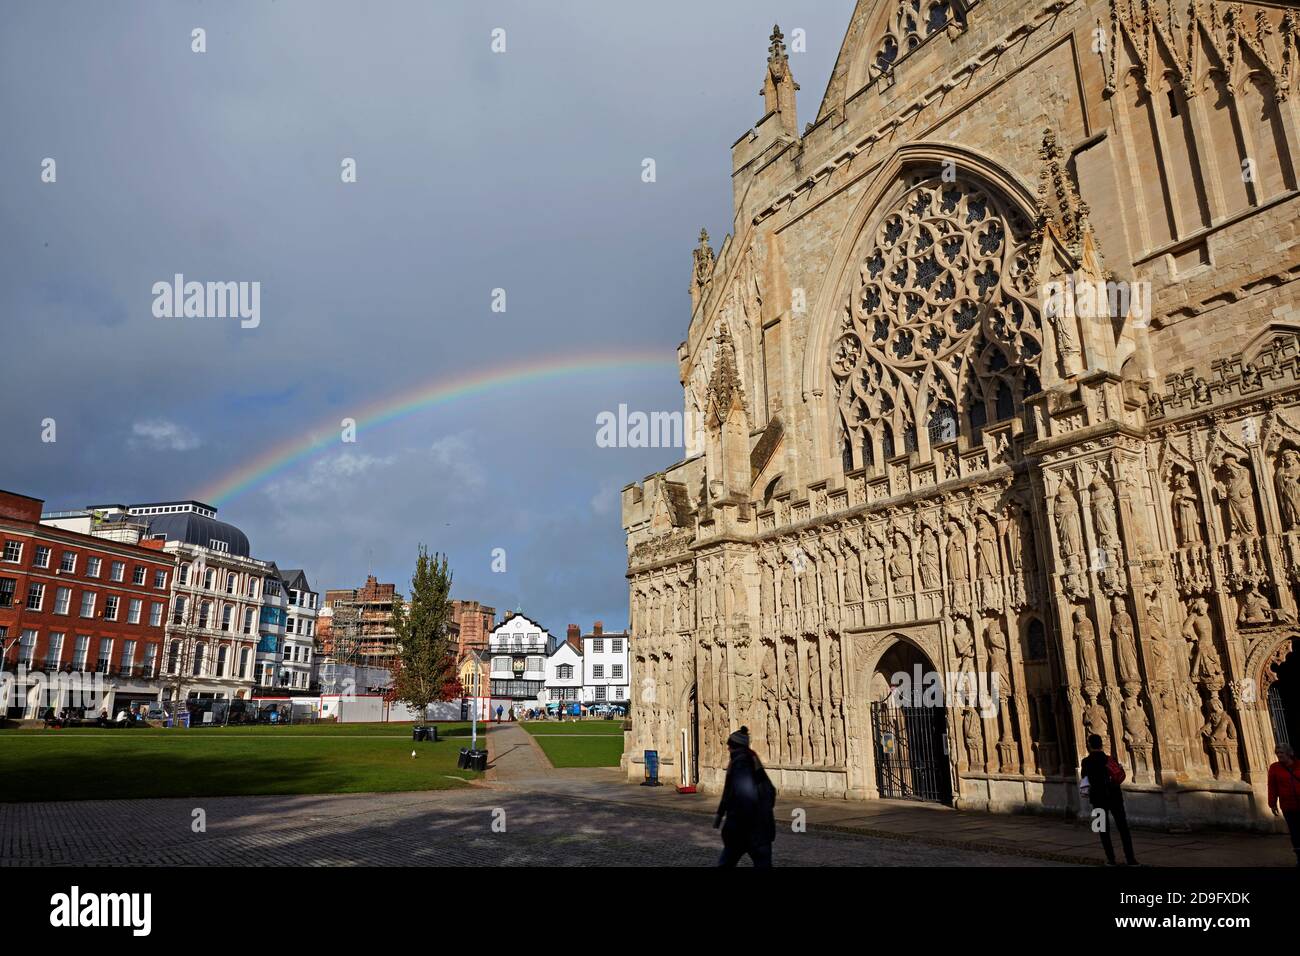 Facade of Exeter Cathedral with Central Exeter with rainbow in background Stock Photo